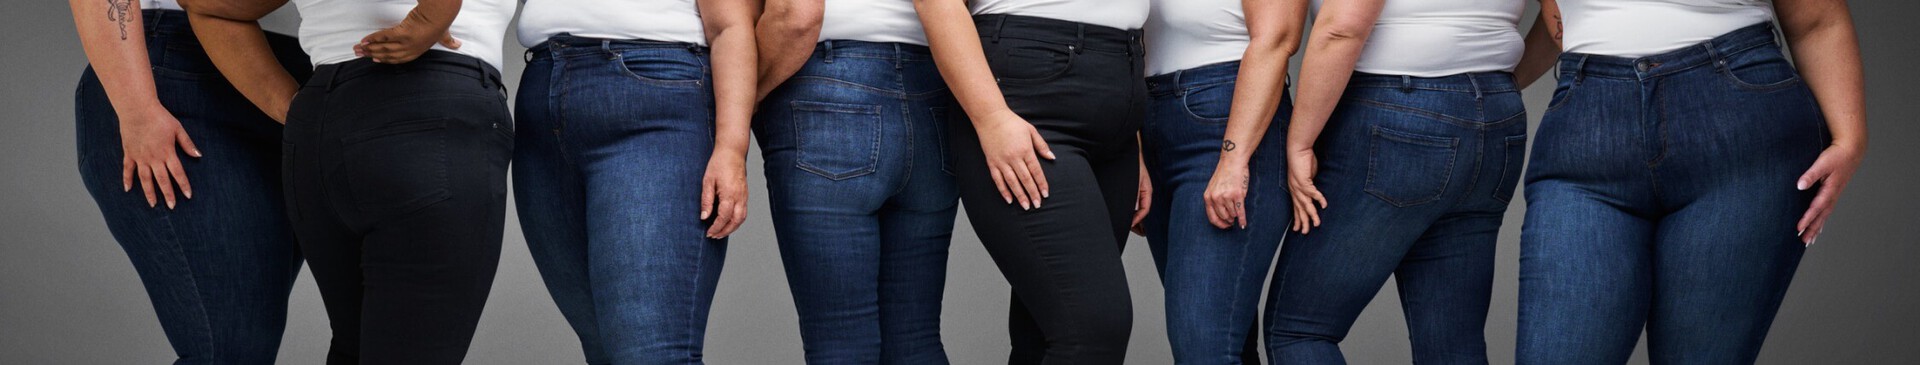 1 pair of jeans - 3 body shapes 